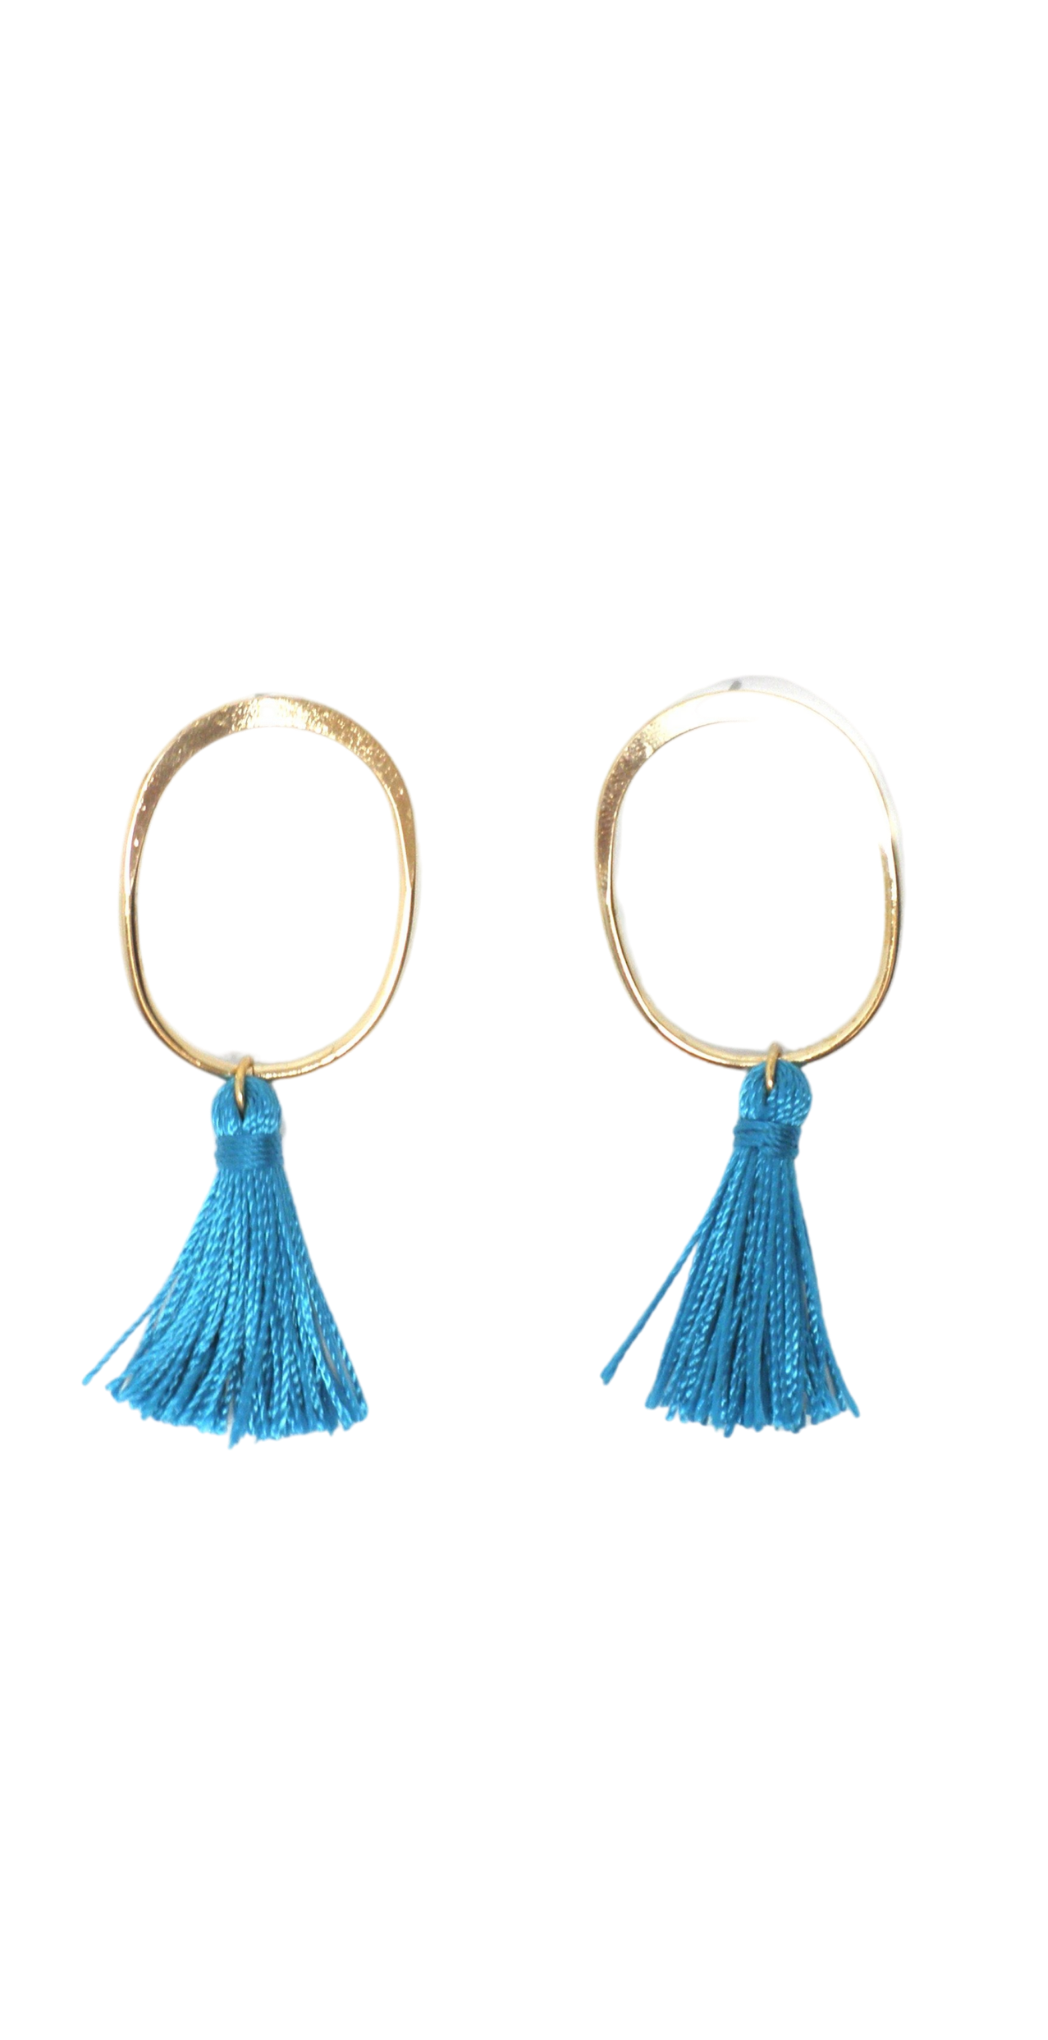 Gold Dangling Earrings with Blue Tassels - The Fashion Foundation - {{ discount designer}}